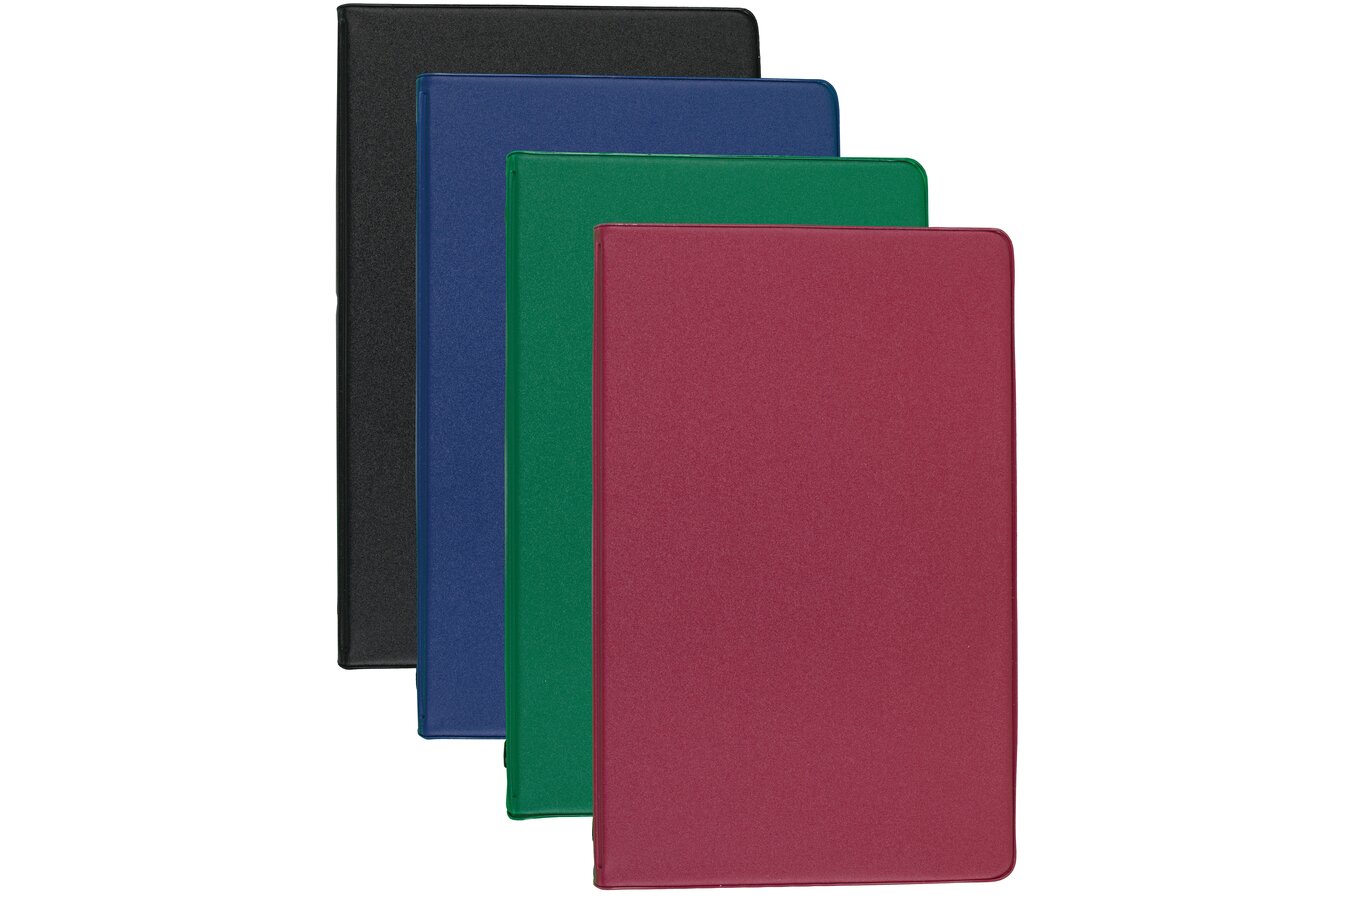 Find Mini Ring Binders in Many Styles + Colors